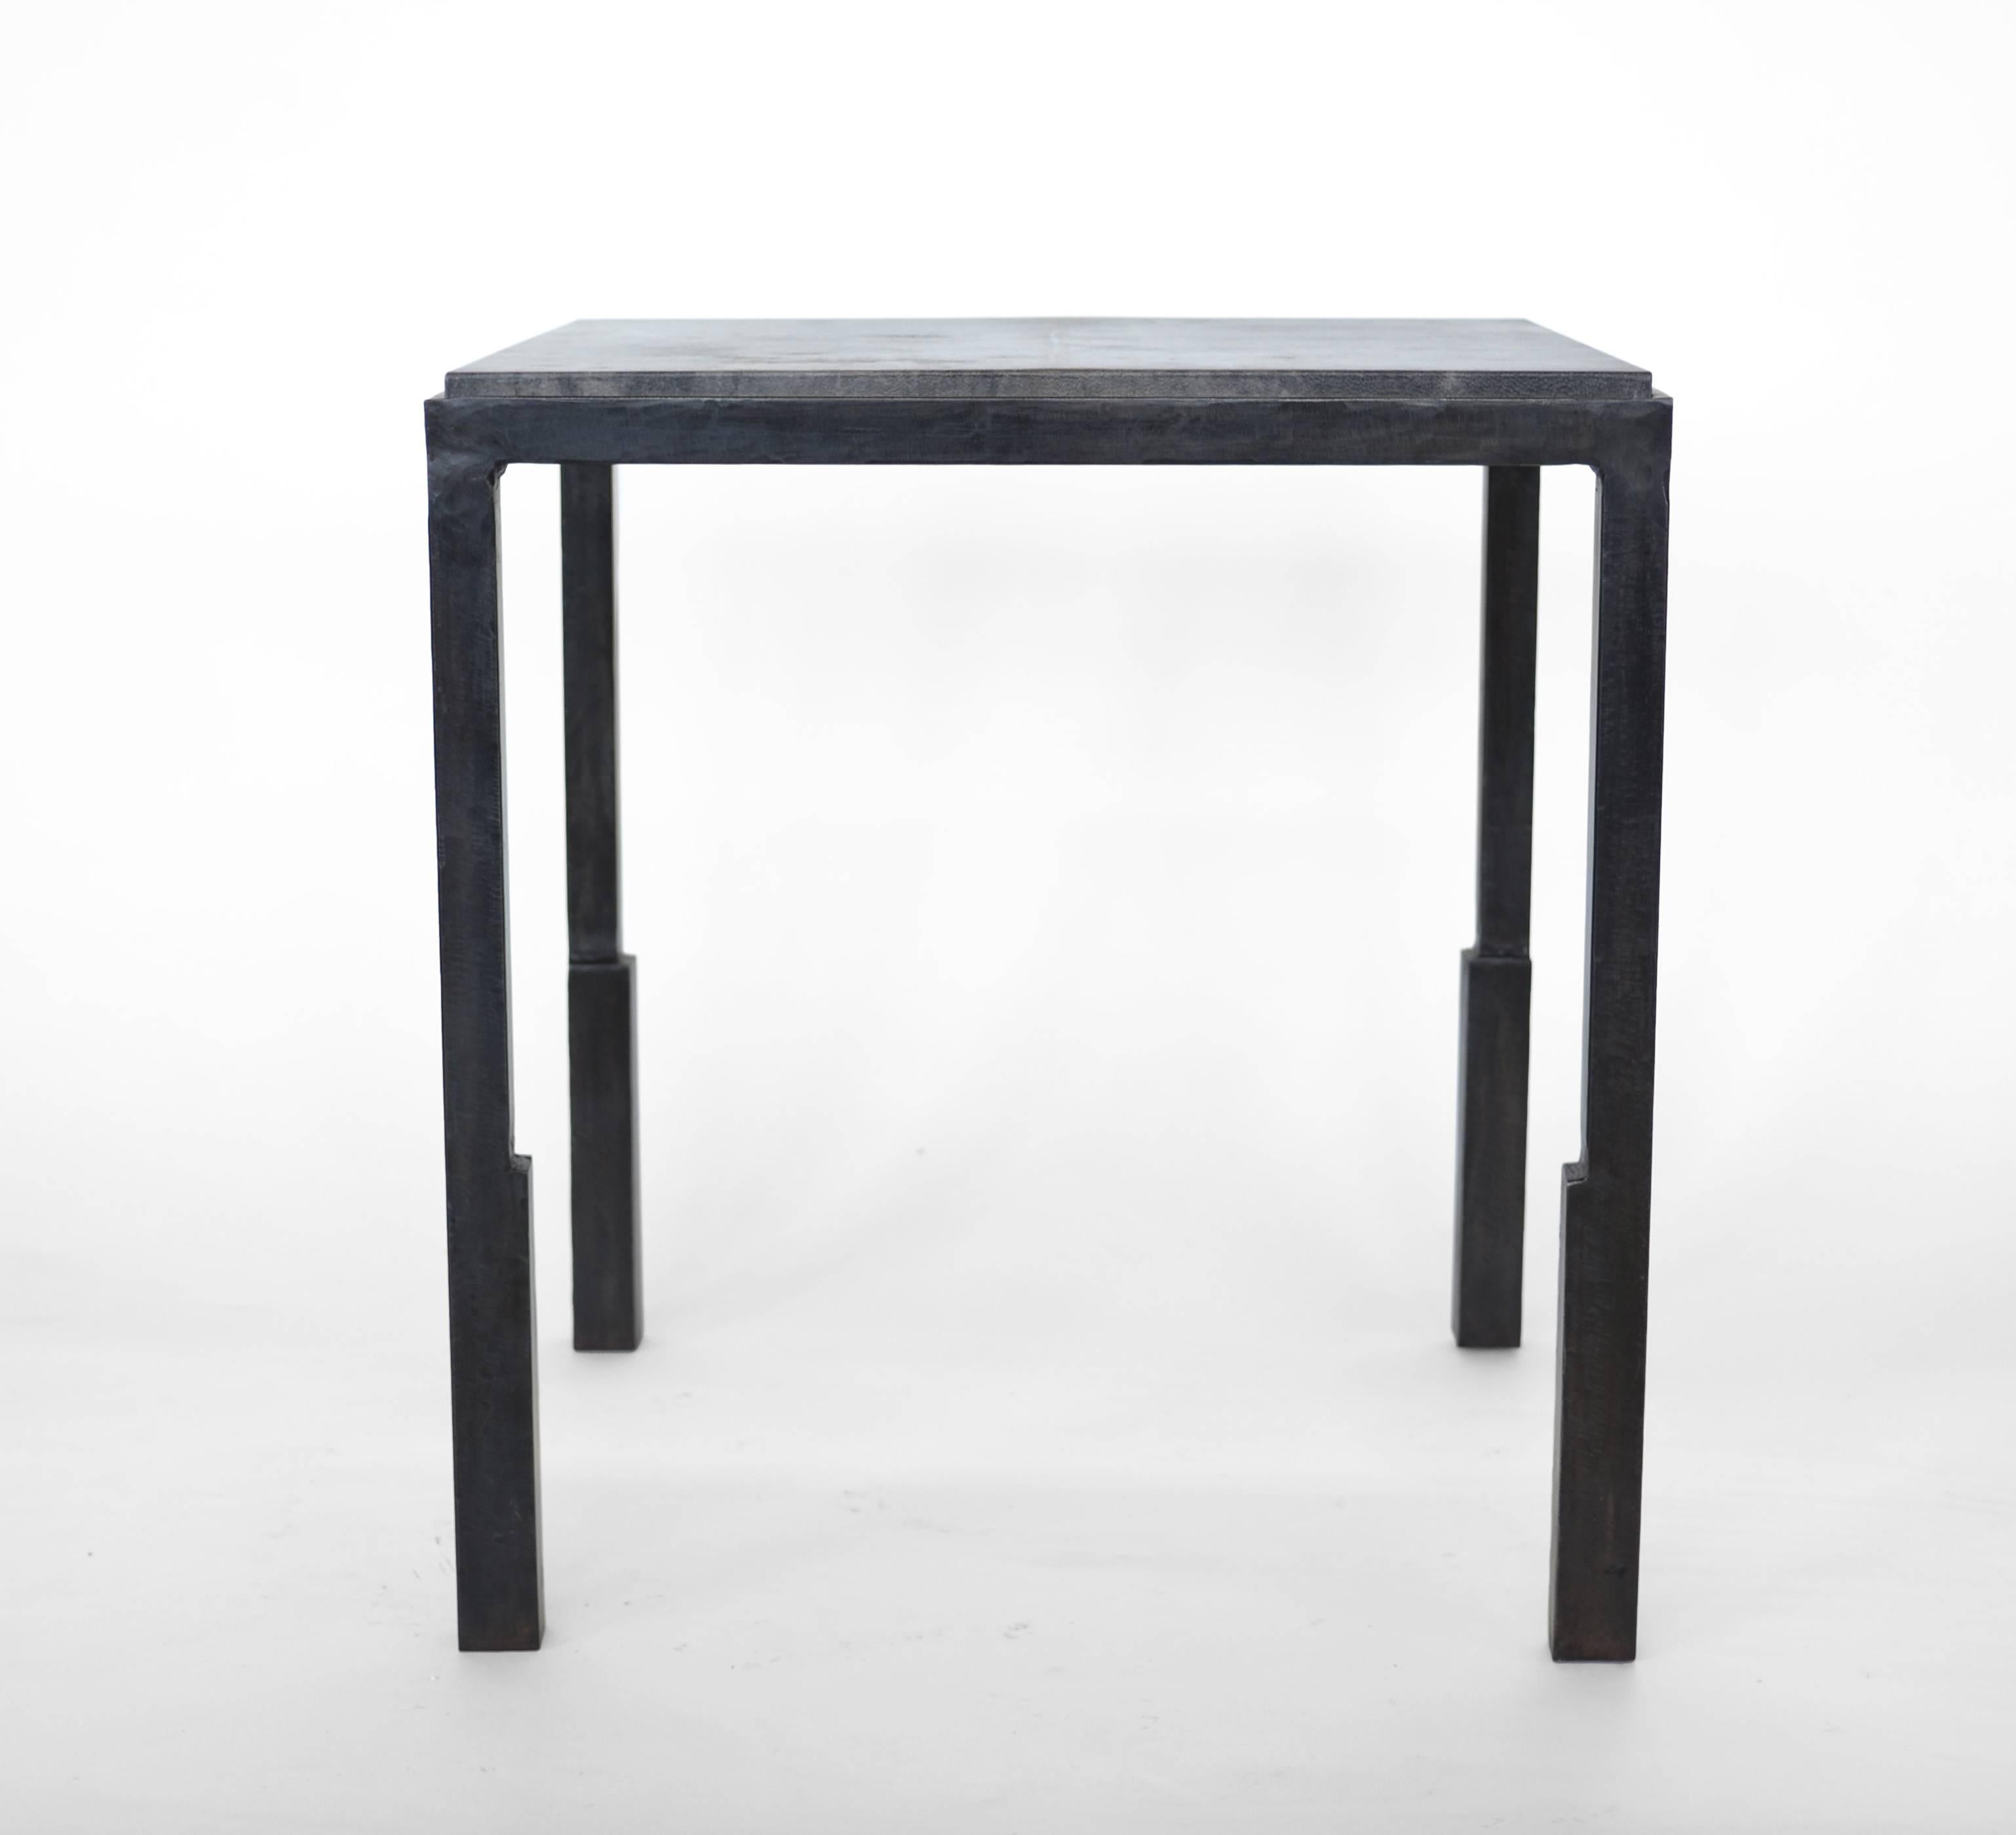 Parchment Side Table Pair Modern Geometric Stark Thick Handmade Blackened Steel In New Condition For Sale In Bronx, NY